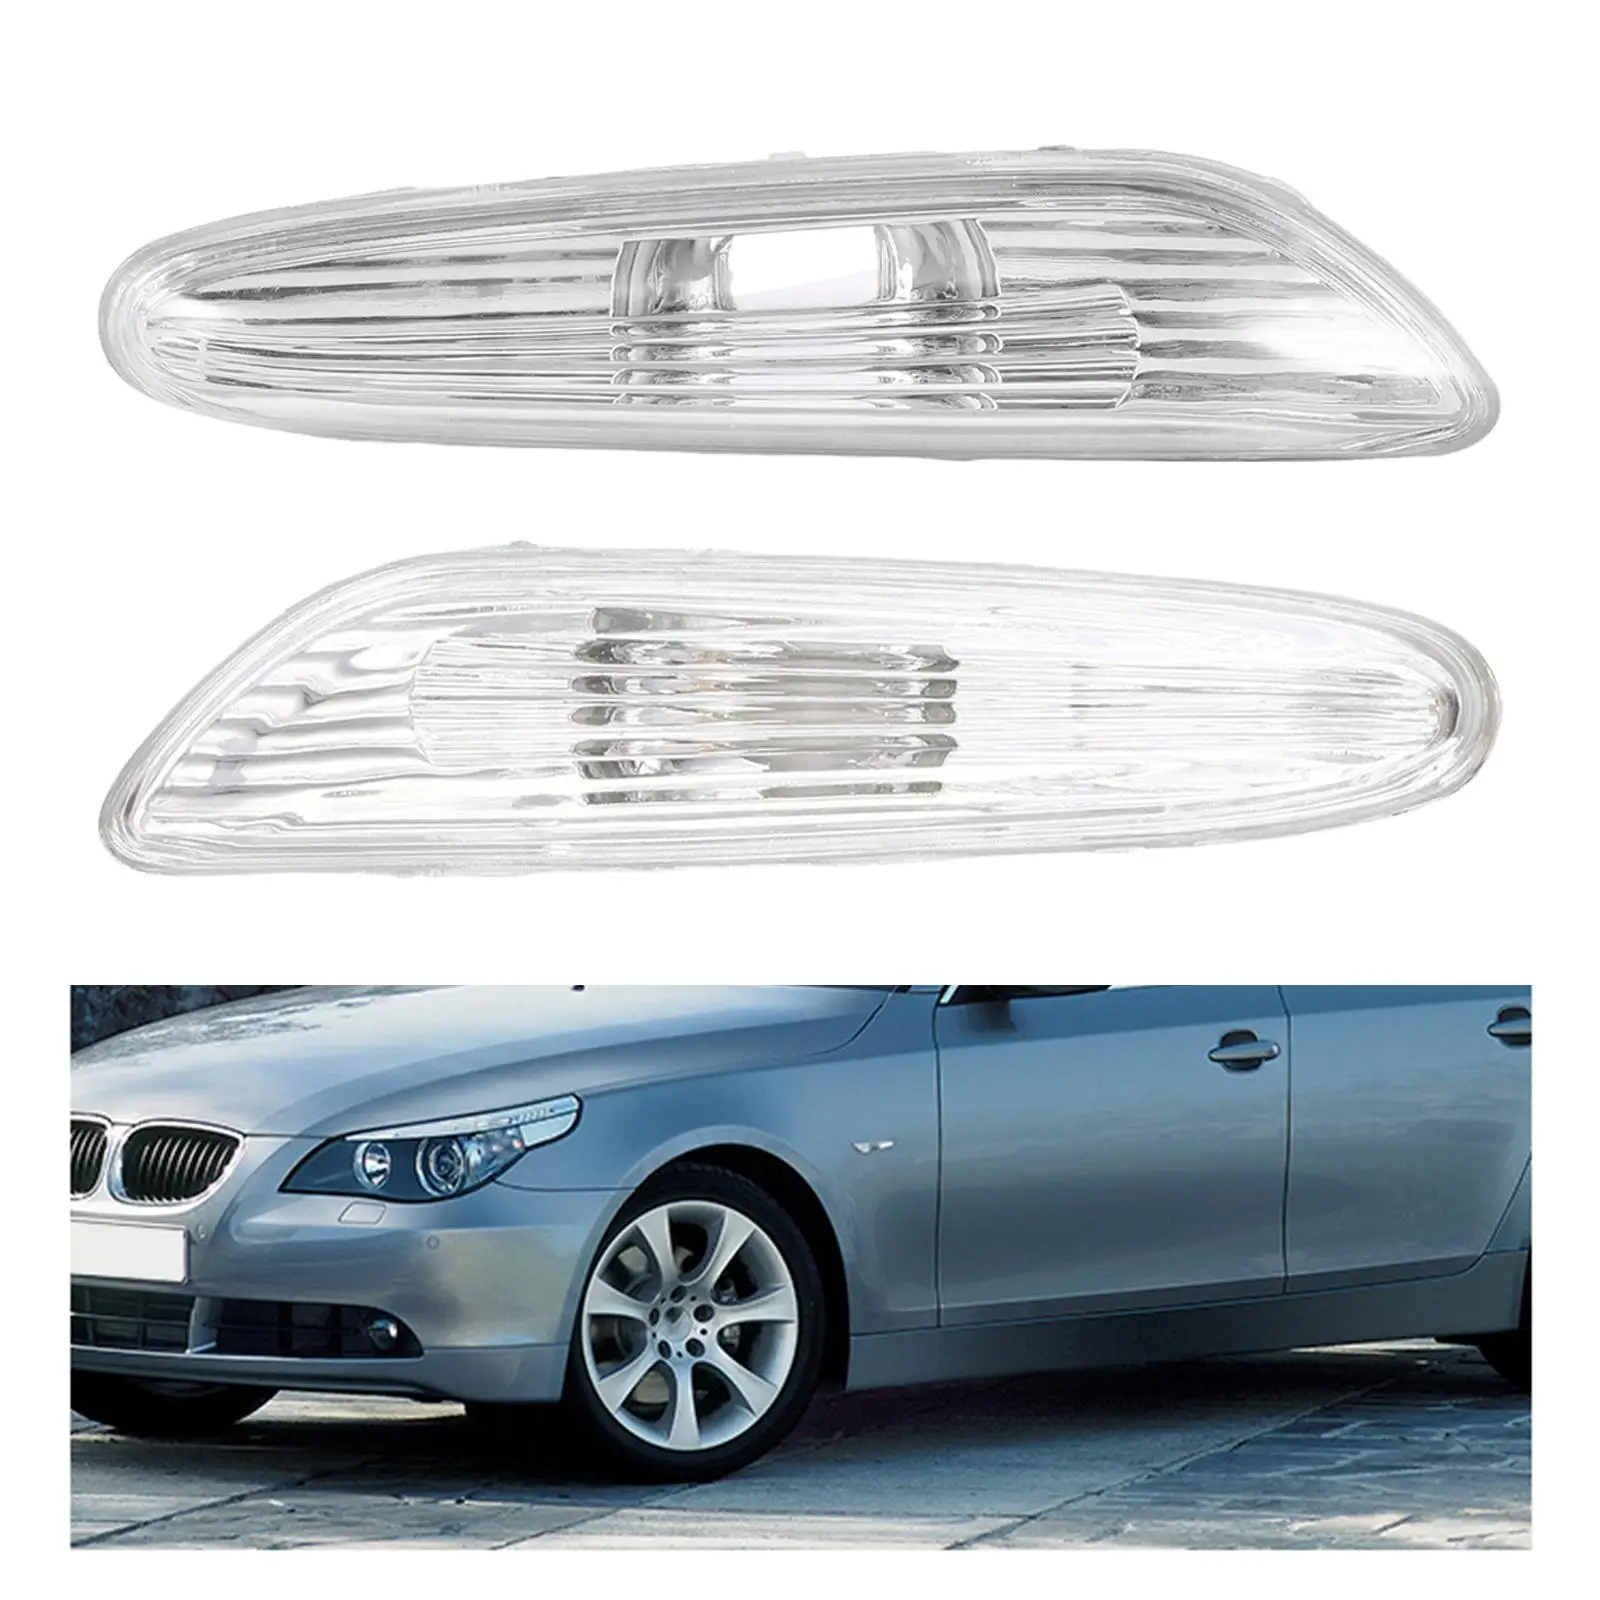 Side Indicator Lamp Turn Signal Side Marker for bmw E60 Sturdy